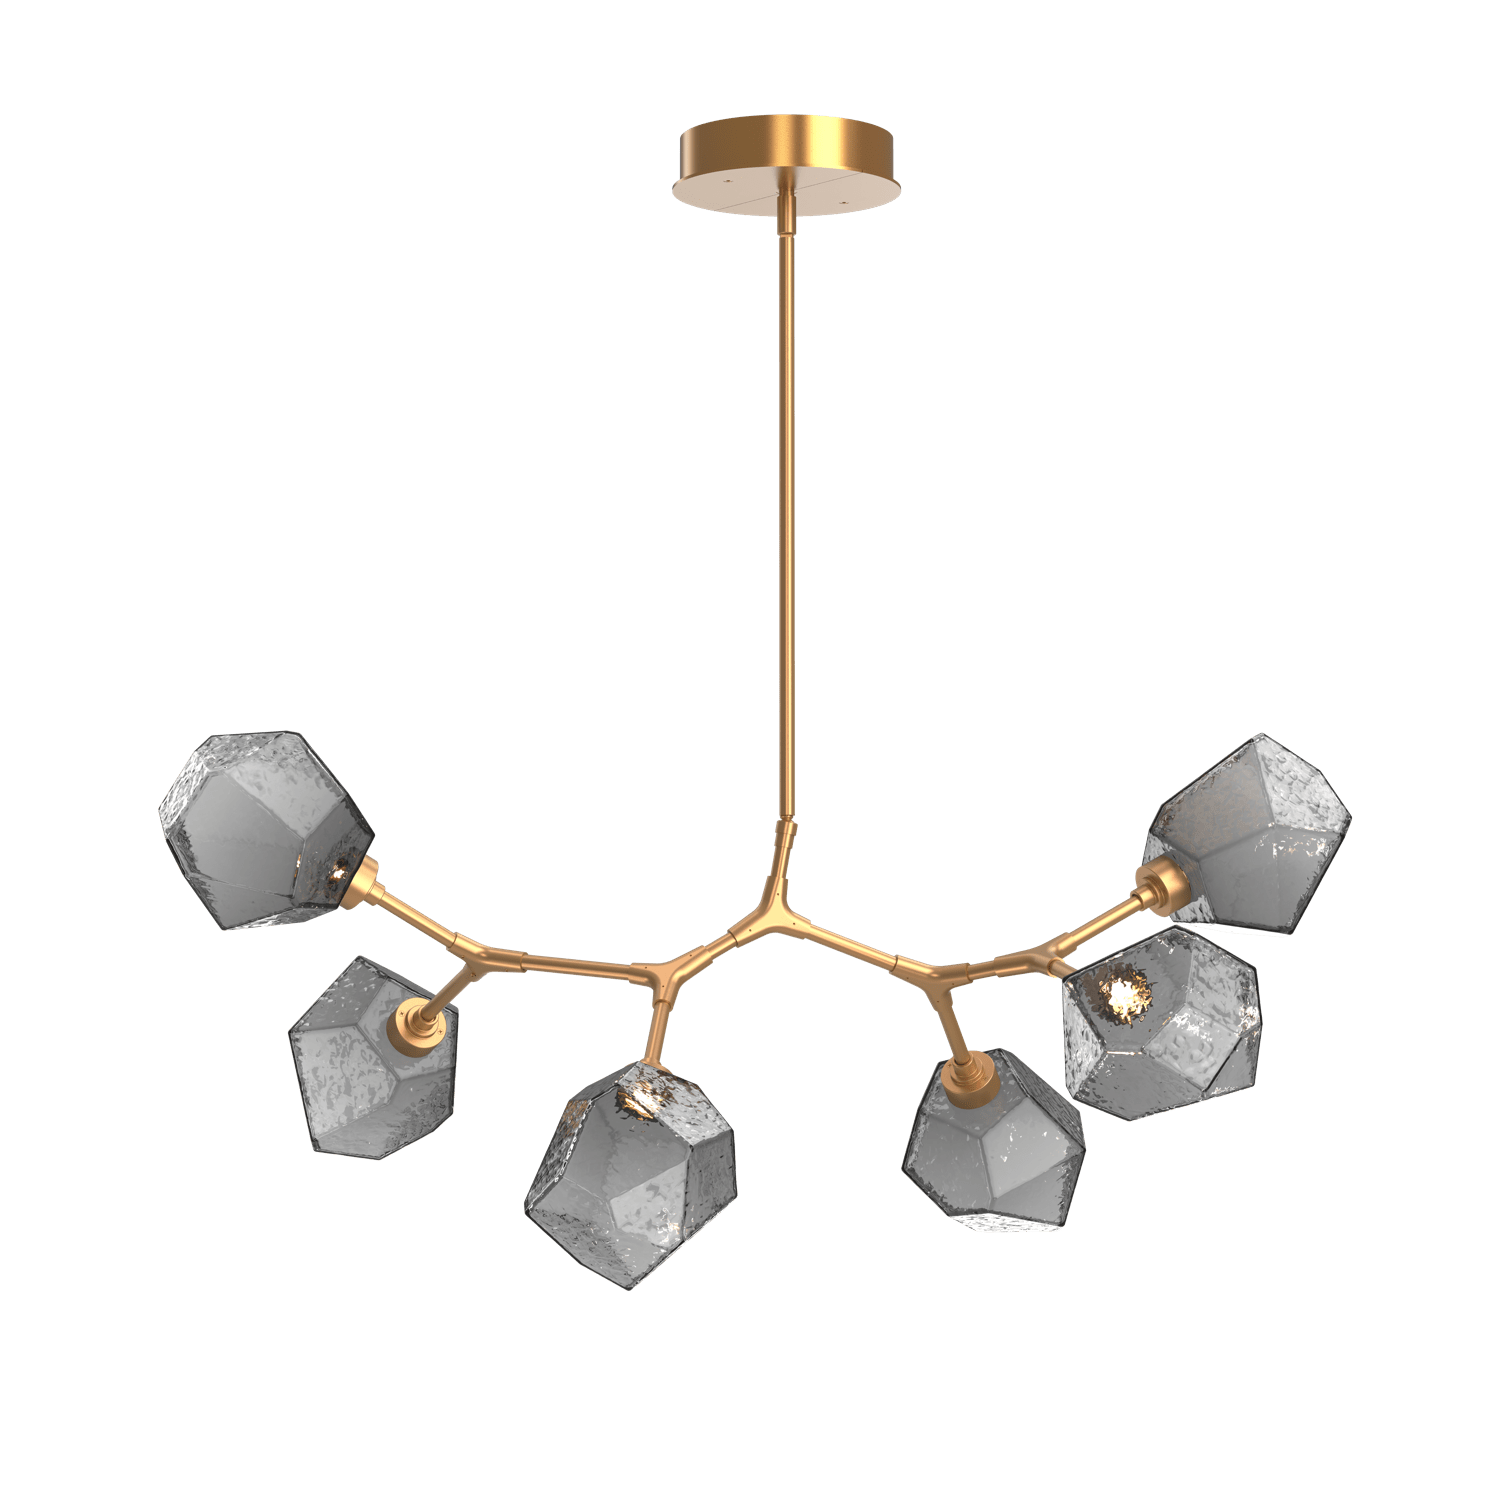 PLB0039-BA-NB-S-Hammerton-Studio-Gem-6-light-modern-branch-chandelier-with-novel-brass-finish-and-smoke-blown-glass-shades-and-LED-lamping